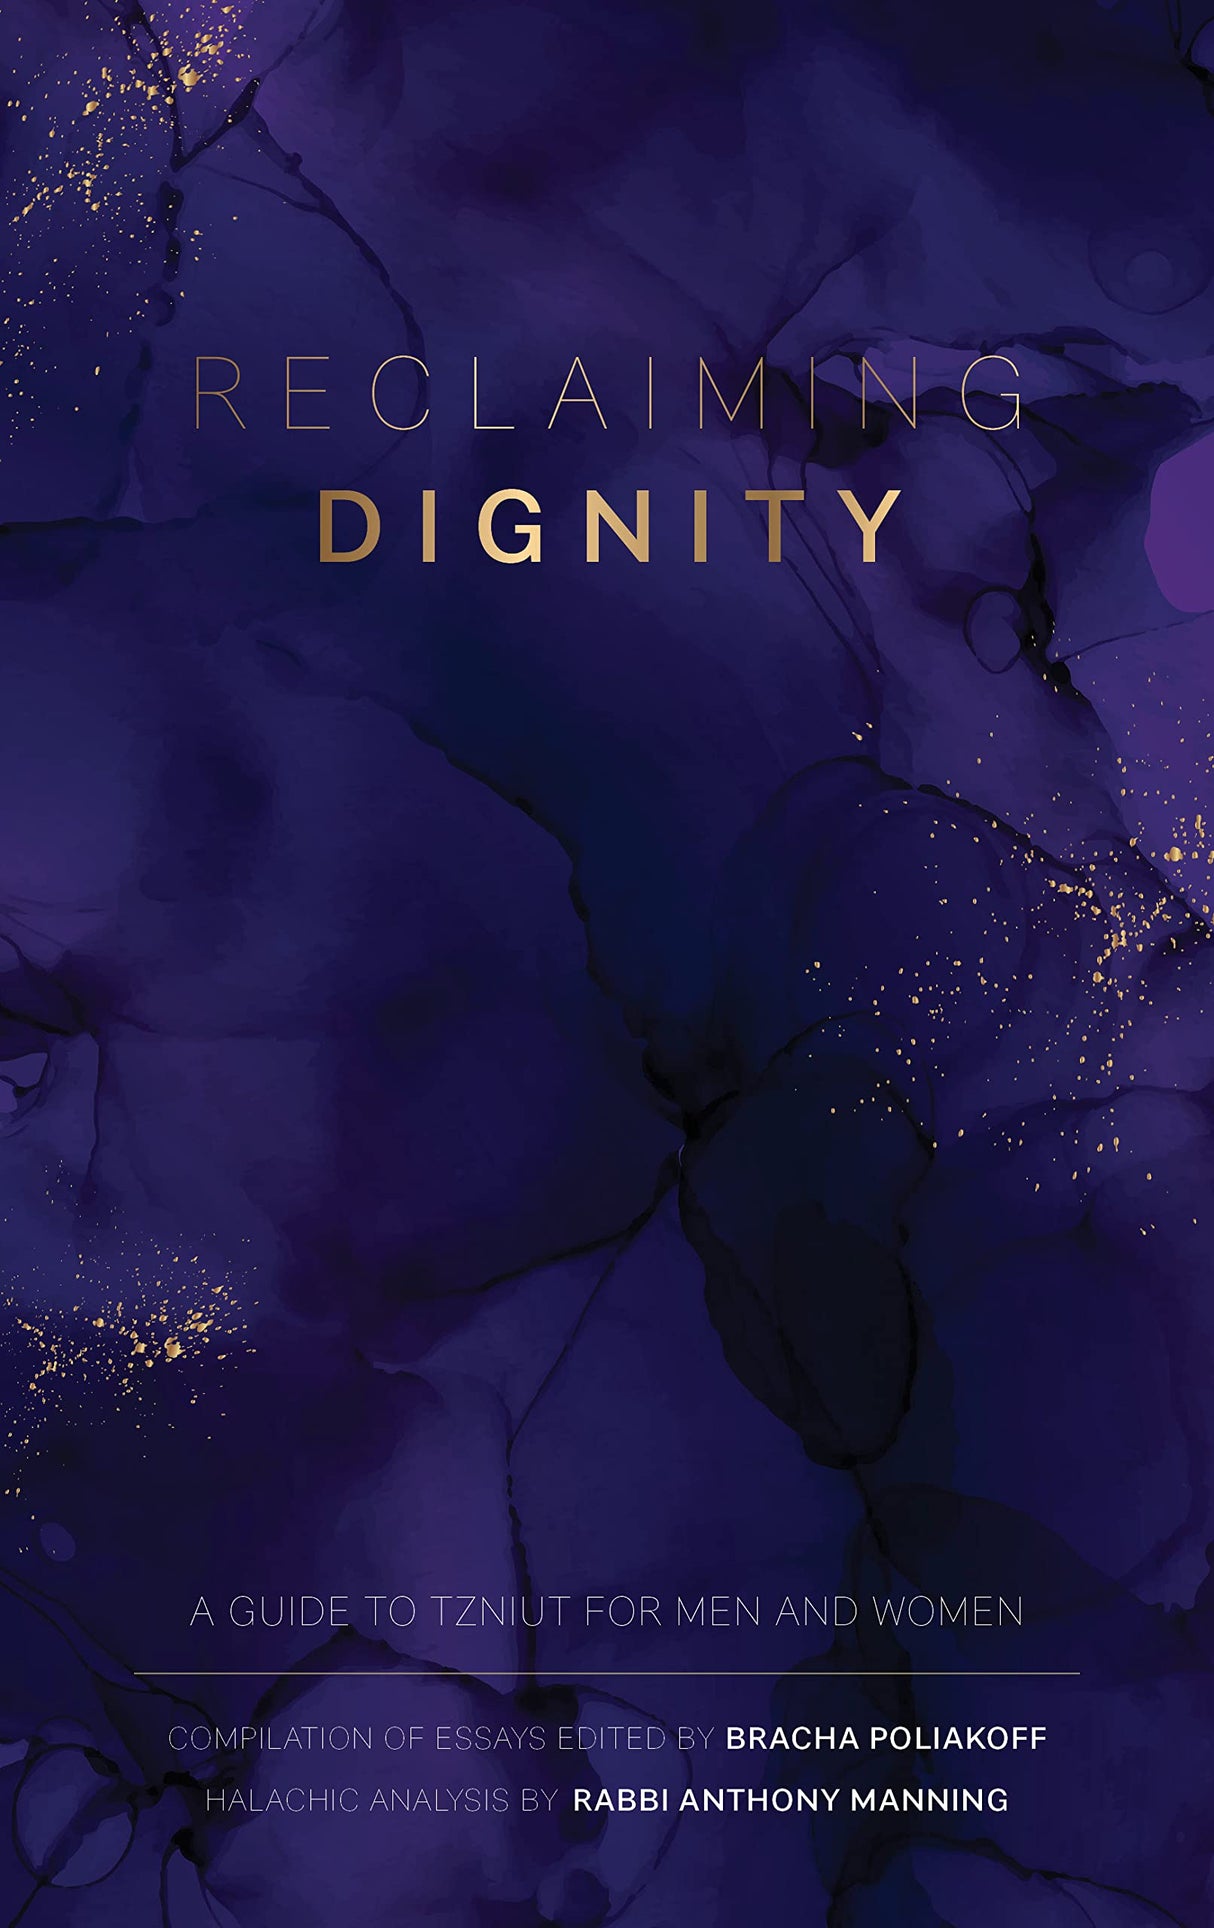 Reclaiming Dignity - A guide to Tzniut for Men and Women